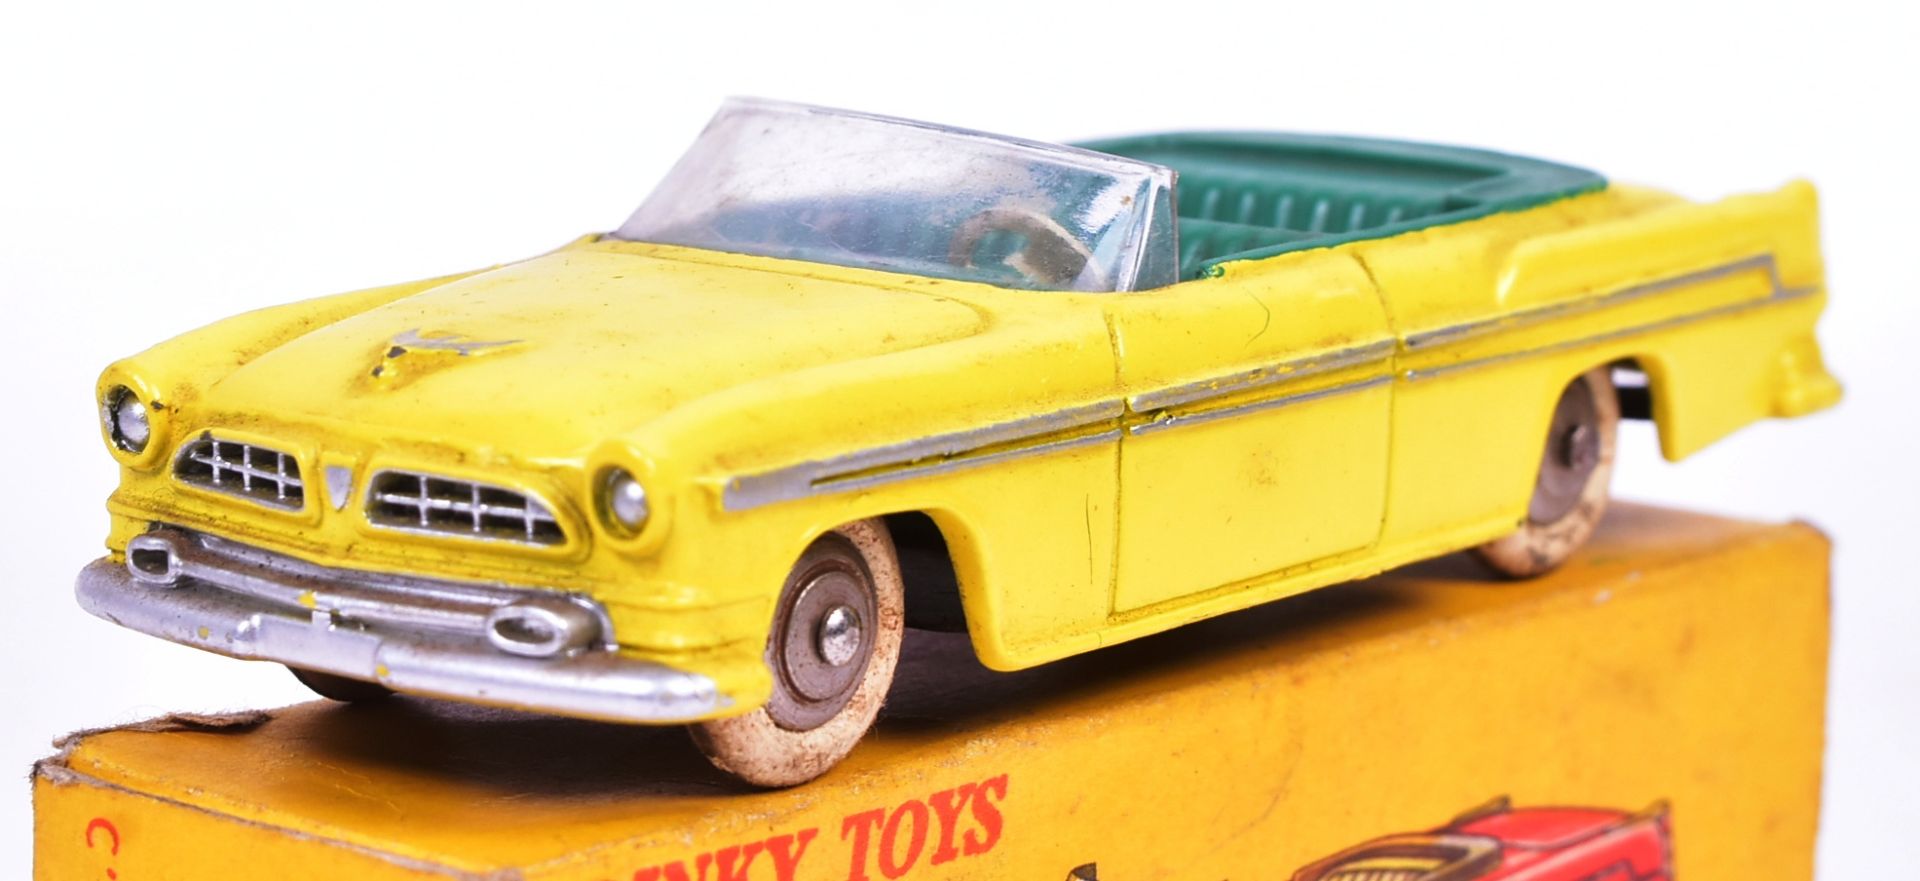 DIECAST - FRENCH DINKY TOYS - CHRYSLER NEW YORKER - Image 2 of 6